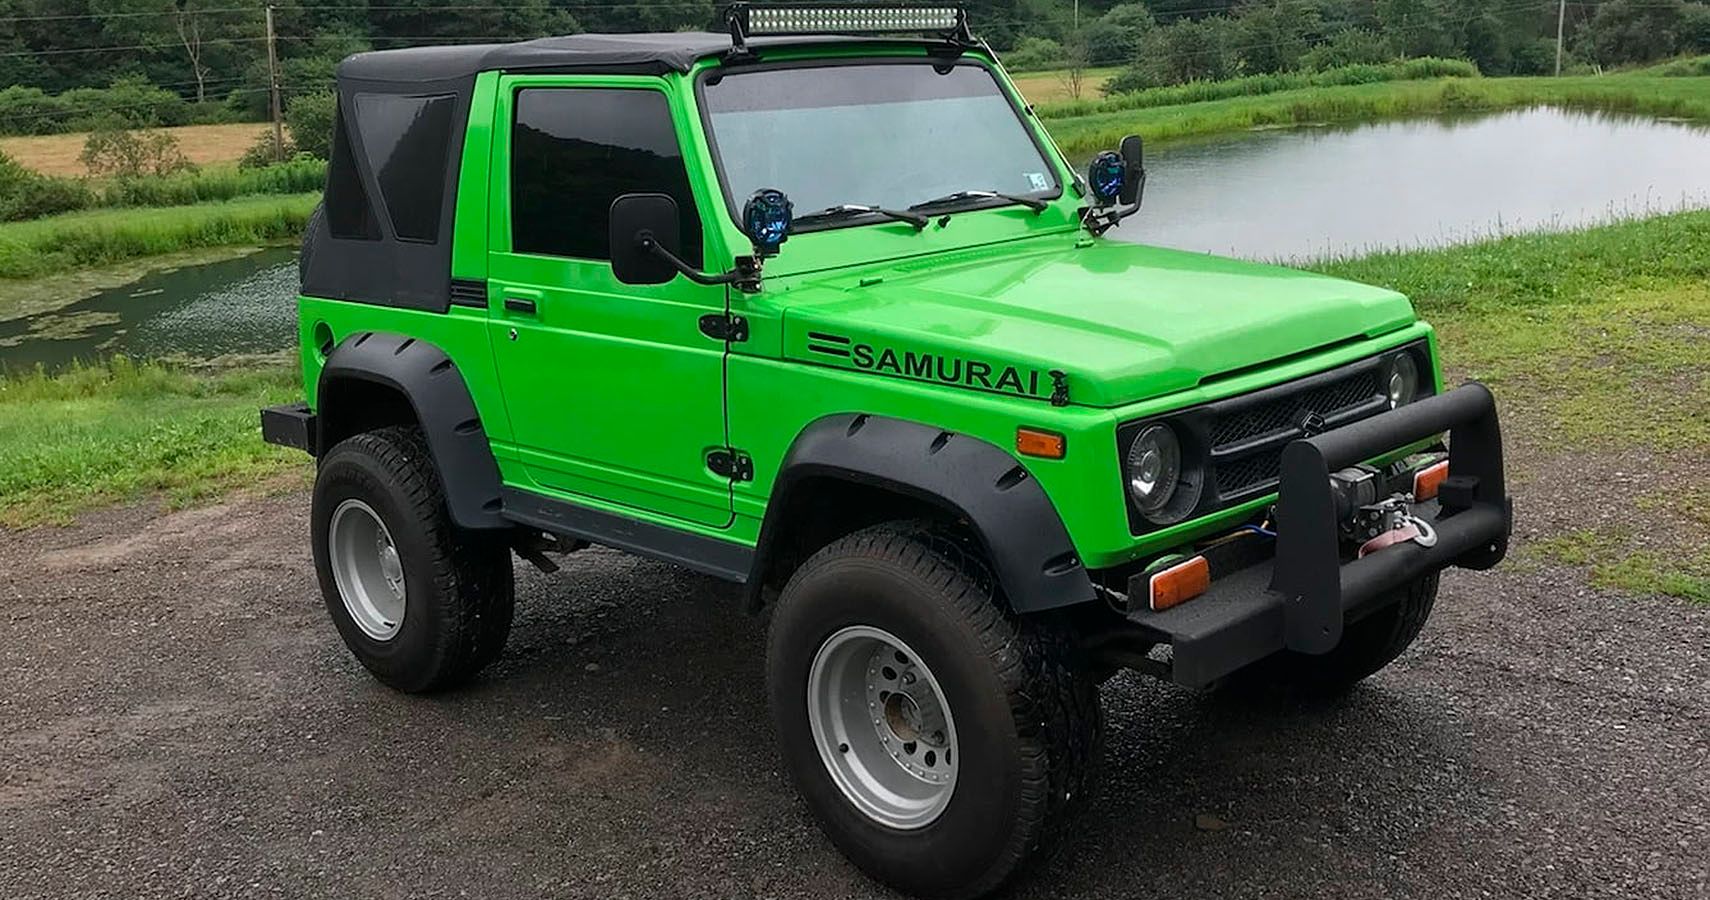 10 Things You Didn't Know About The Suzuki Samurai HotCars